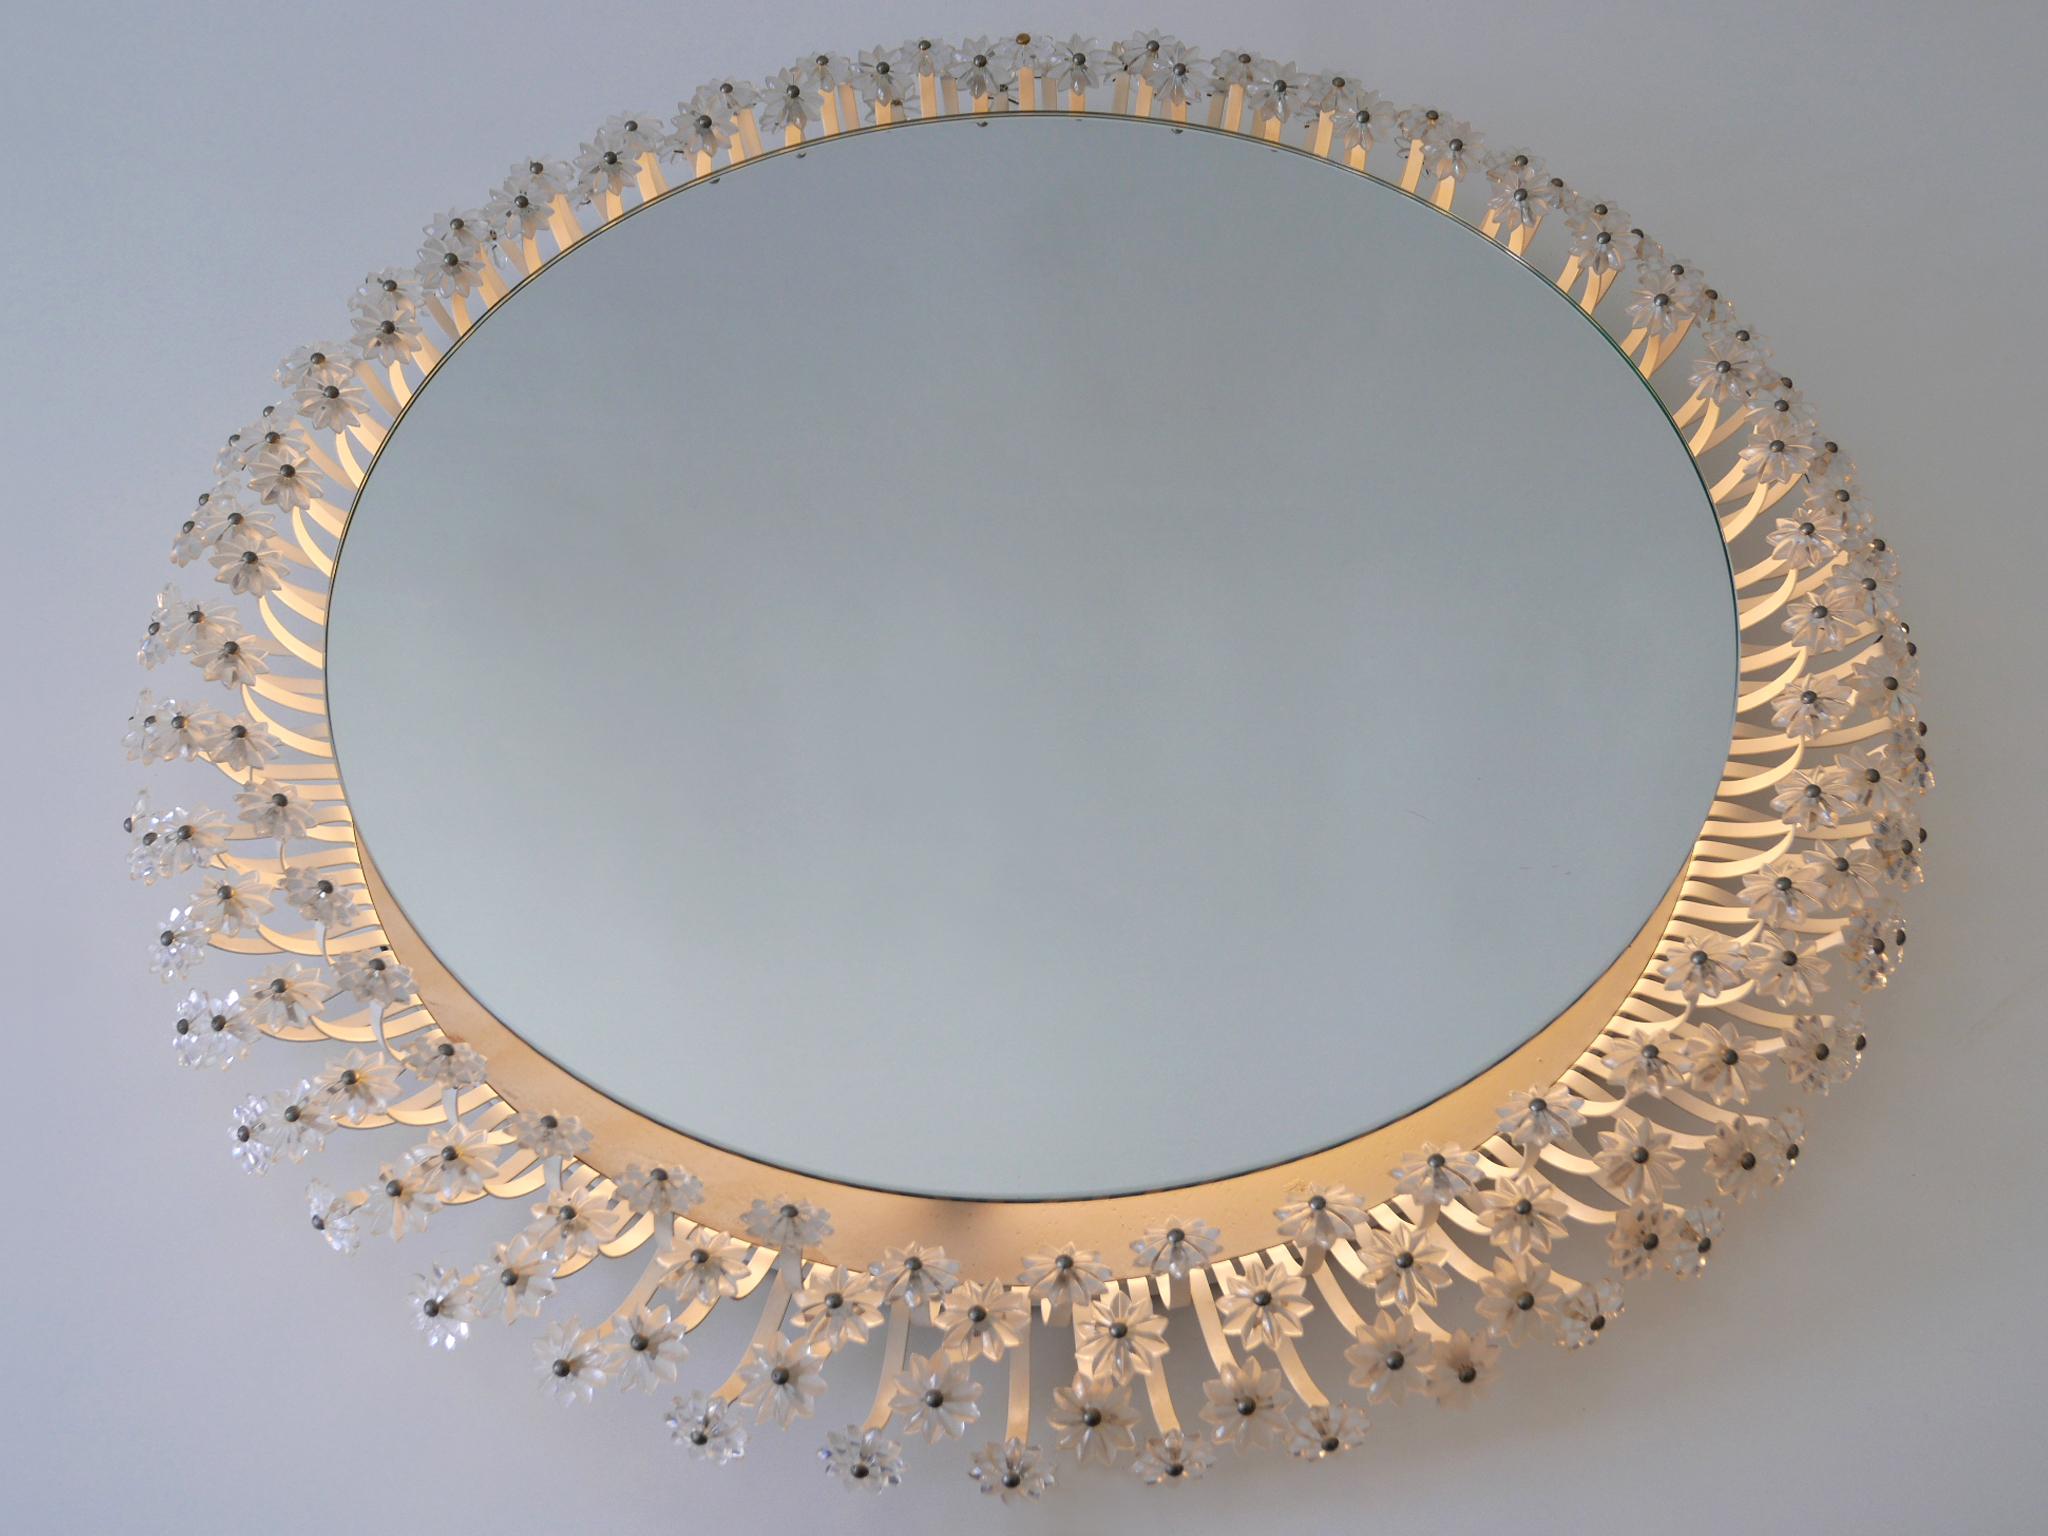 Decorative Mid-Century Modern Backlit Wall Mirror by Schöninger Germany 1960s For Sale 4